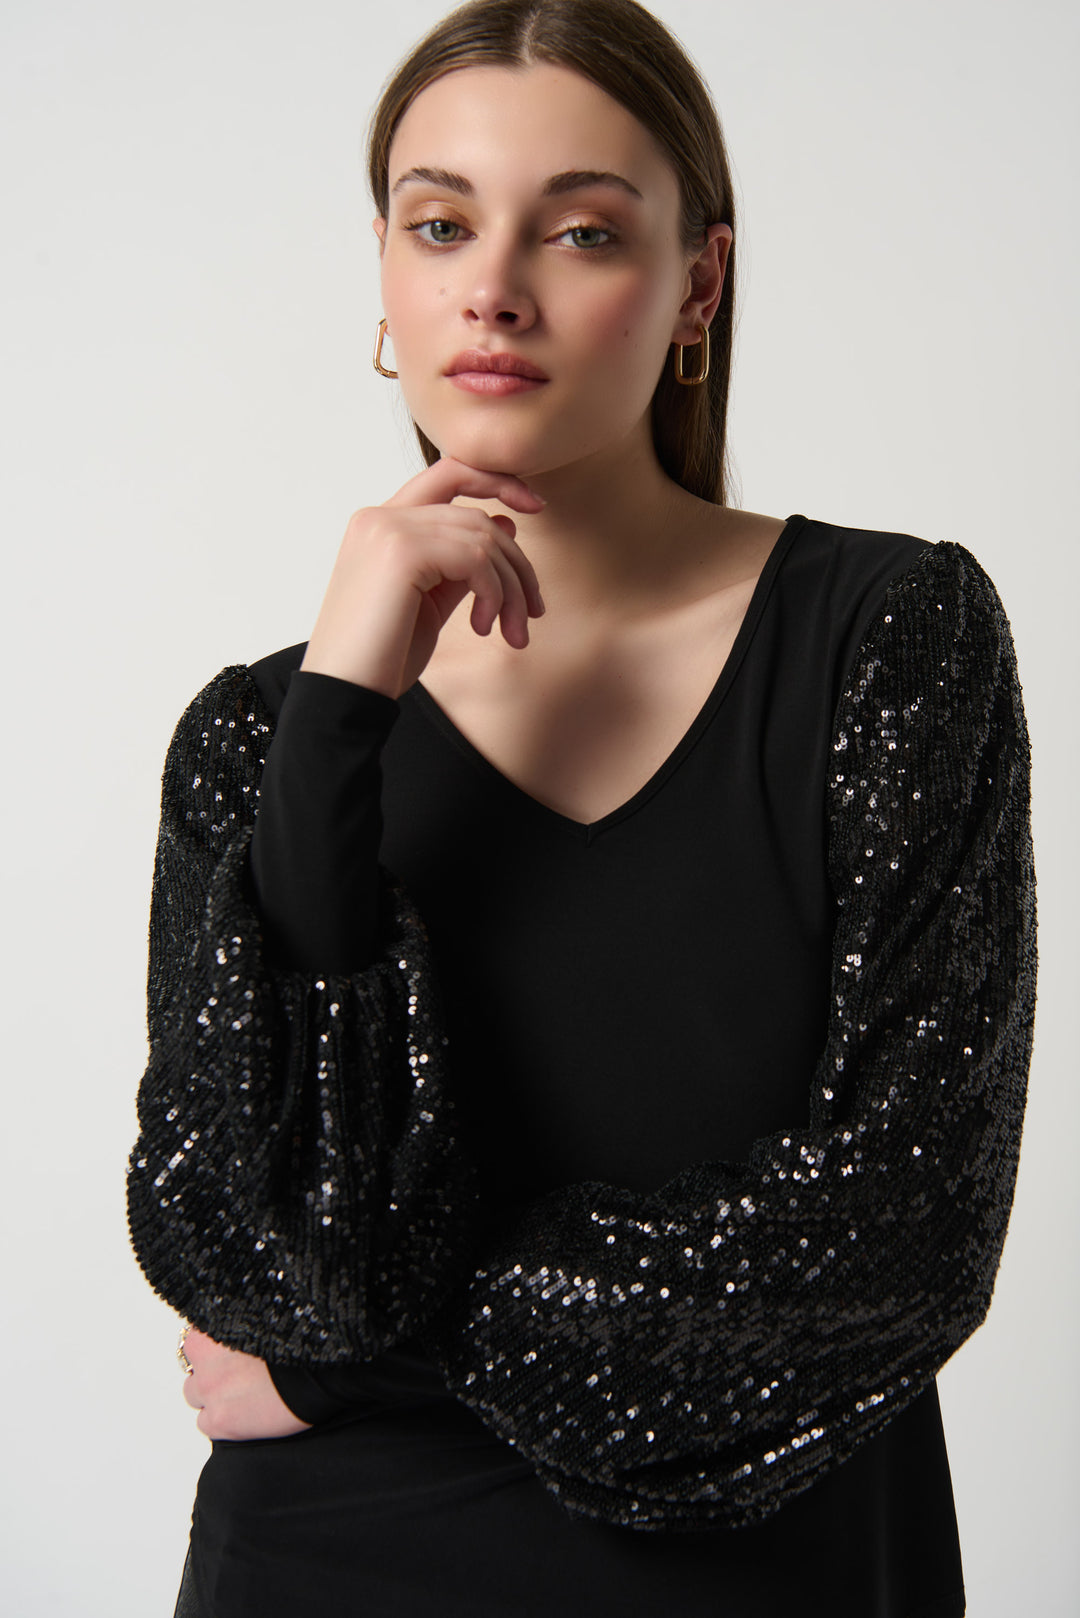 Its luminous  sequins and puffy sleeves contrast with the v-neck silhouette. The more relaxed fit is comfortable and gives the piece a graceful look.